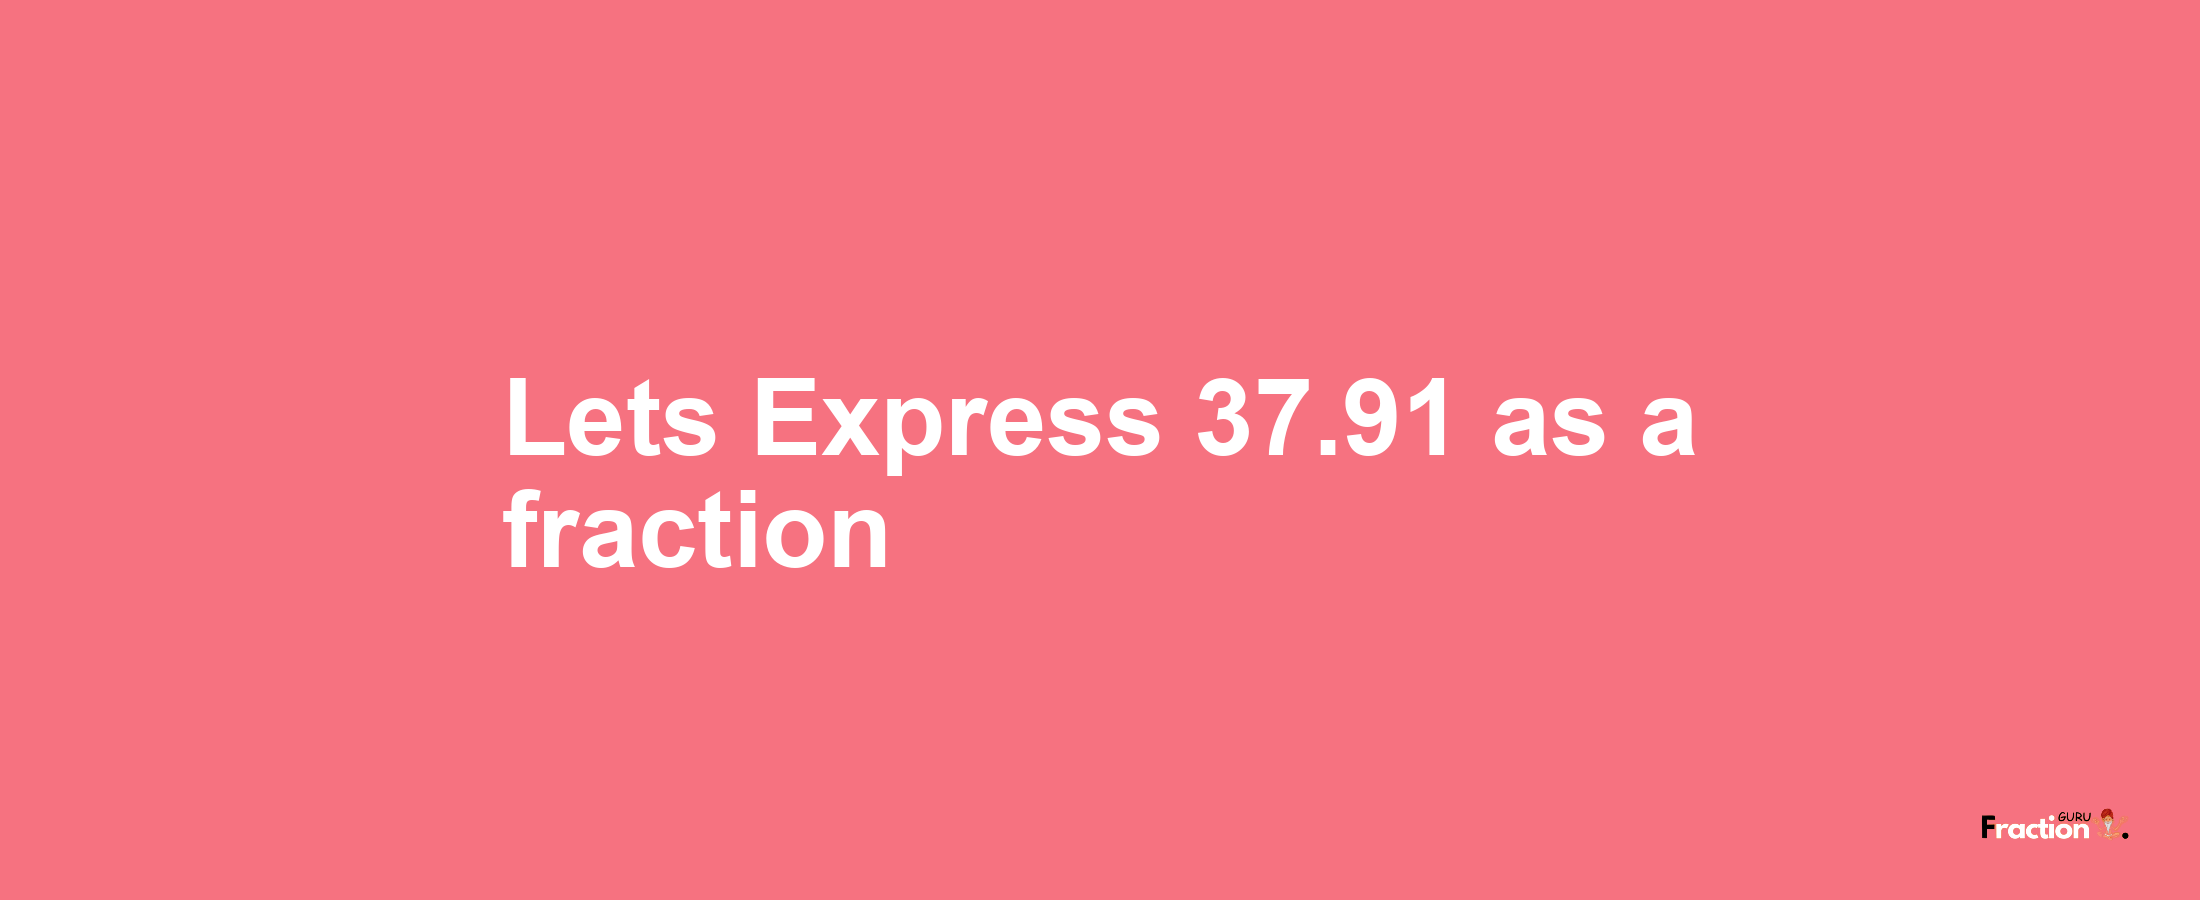 Lets Express 37.91 as afraction